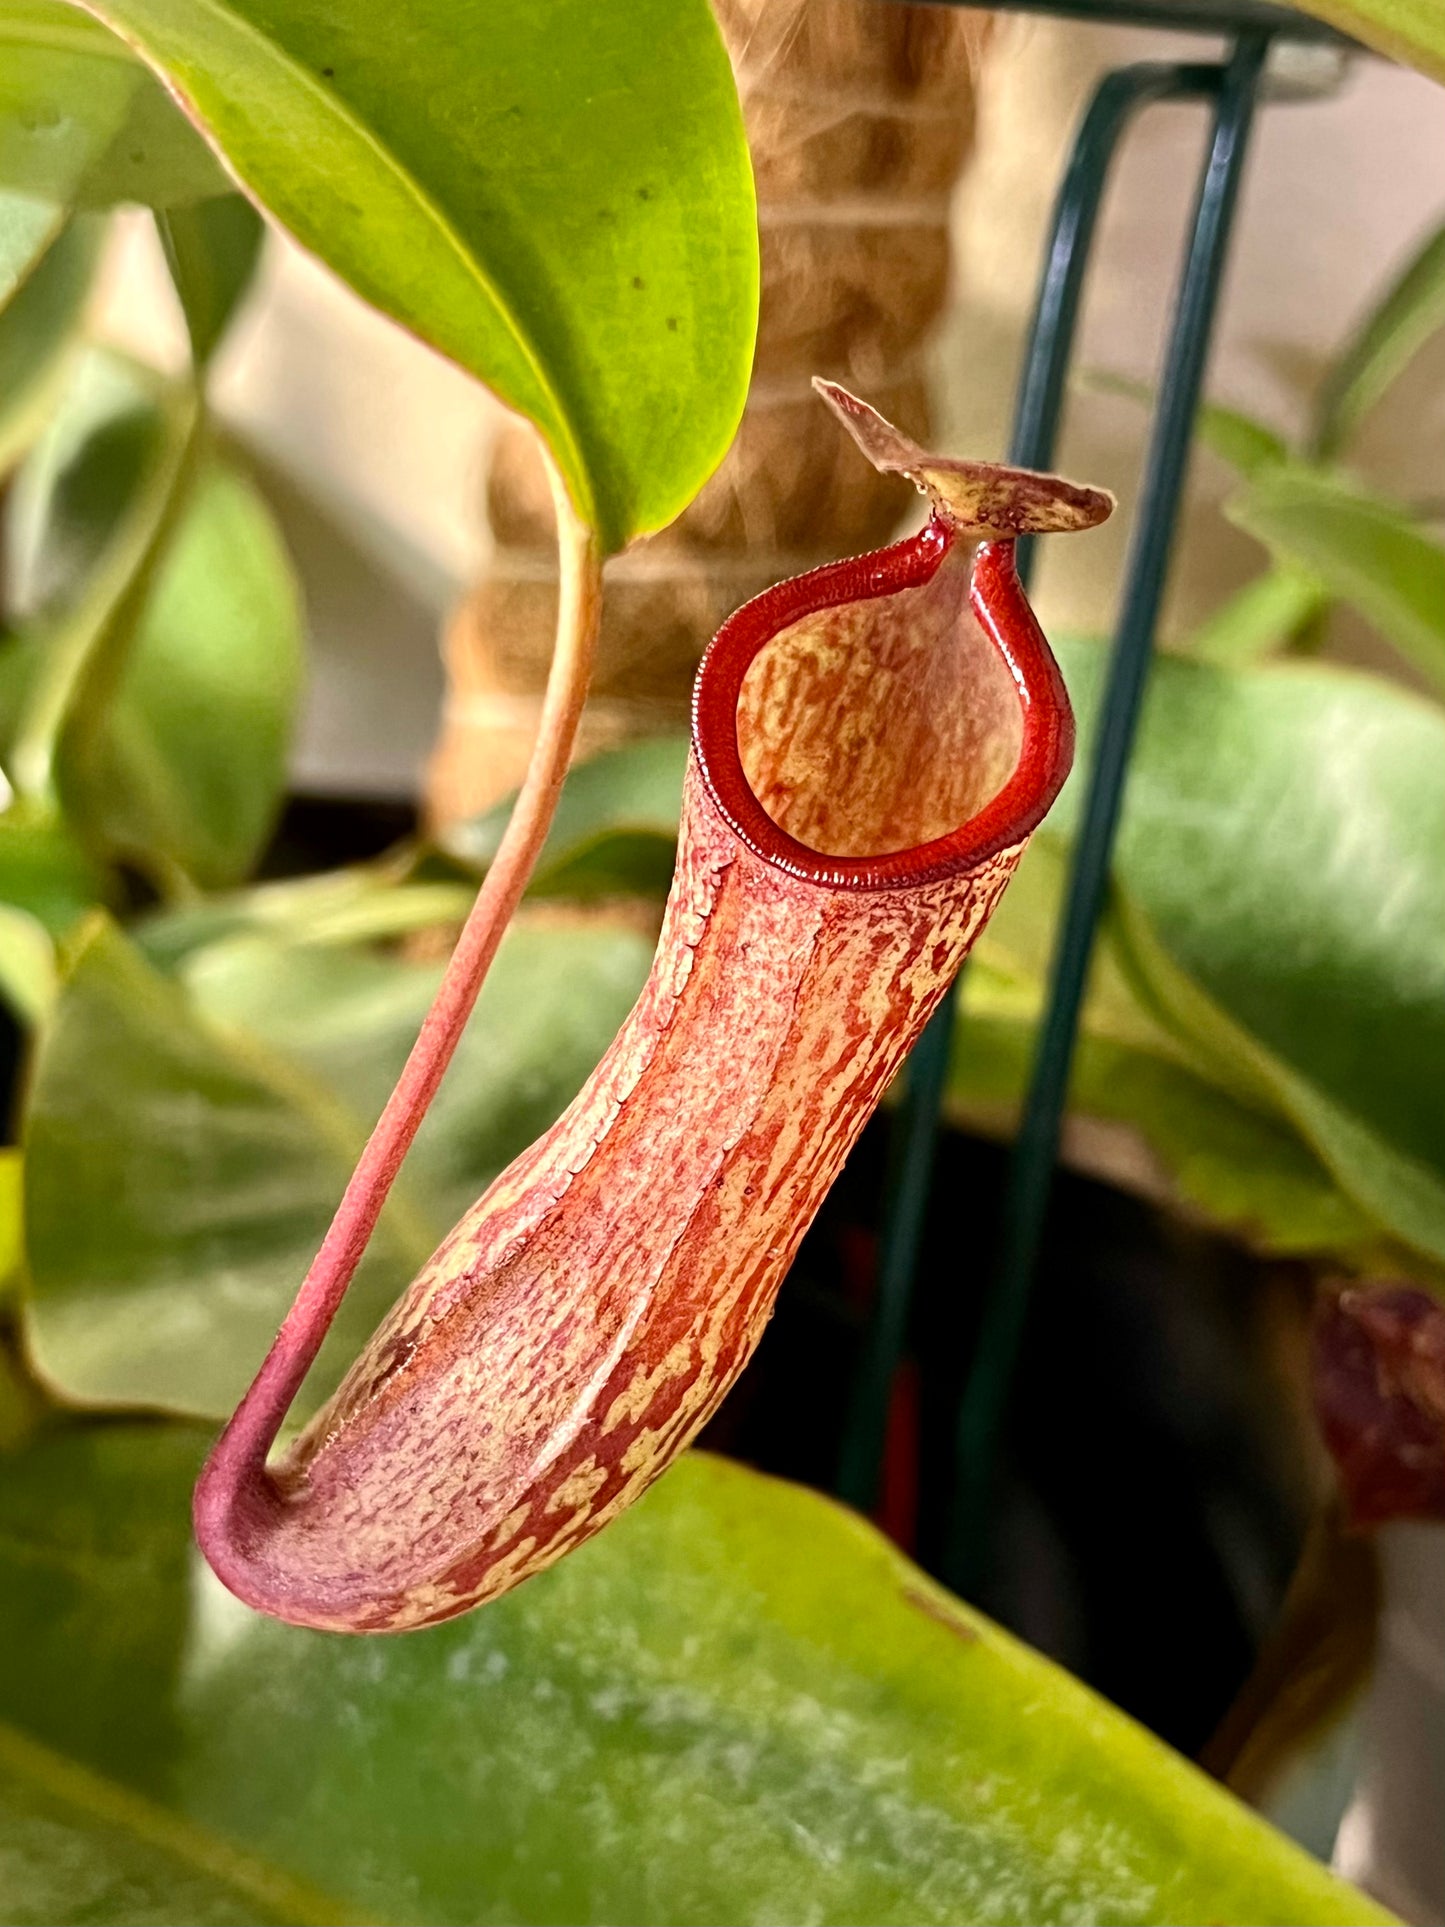 Nepenthes (x splendiana) x ventricosa "red" - established cutting